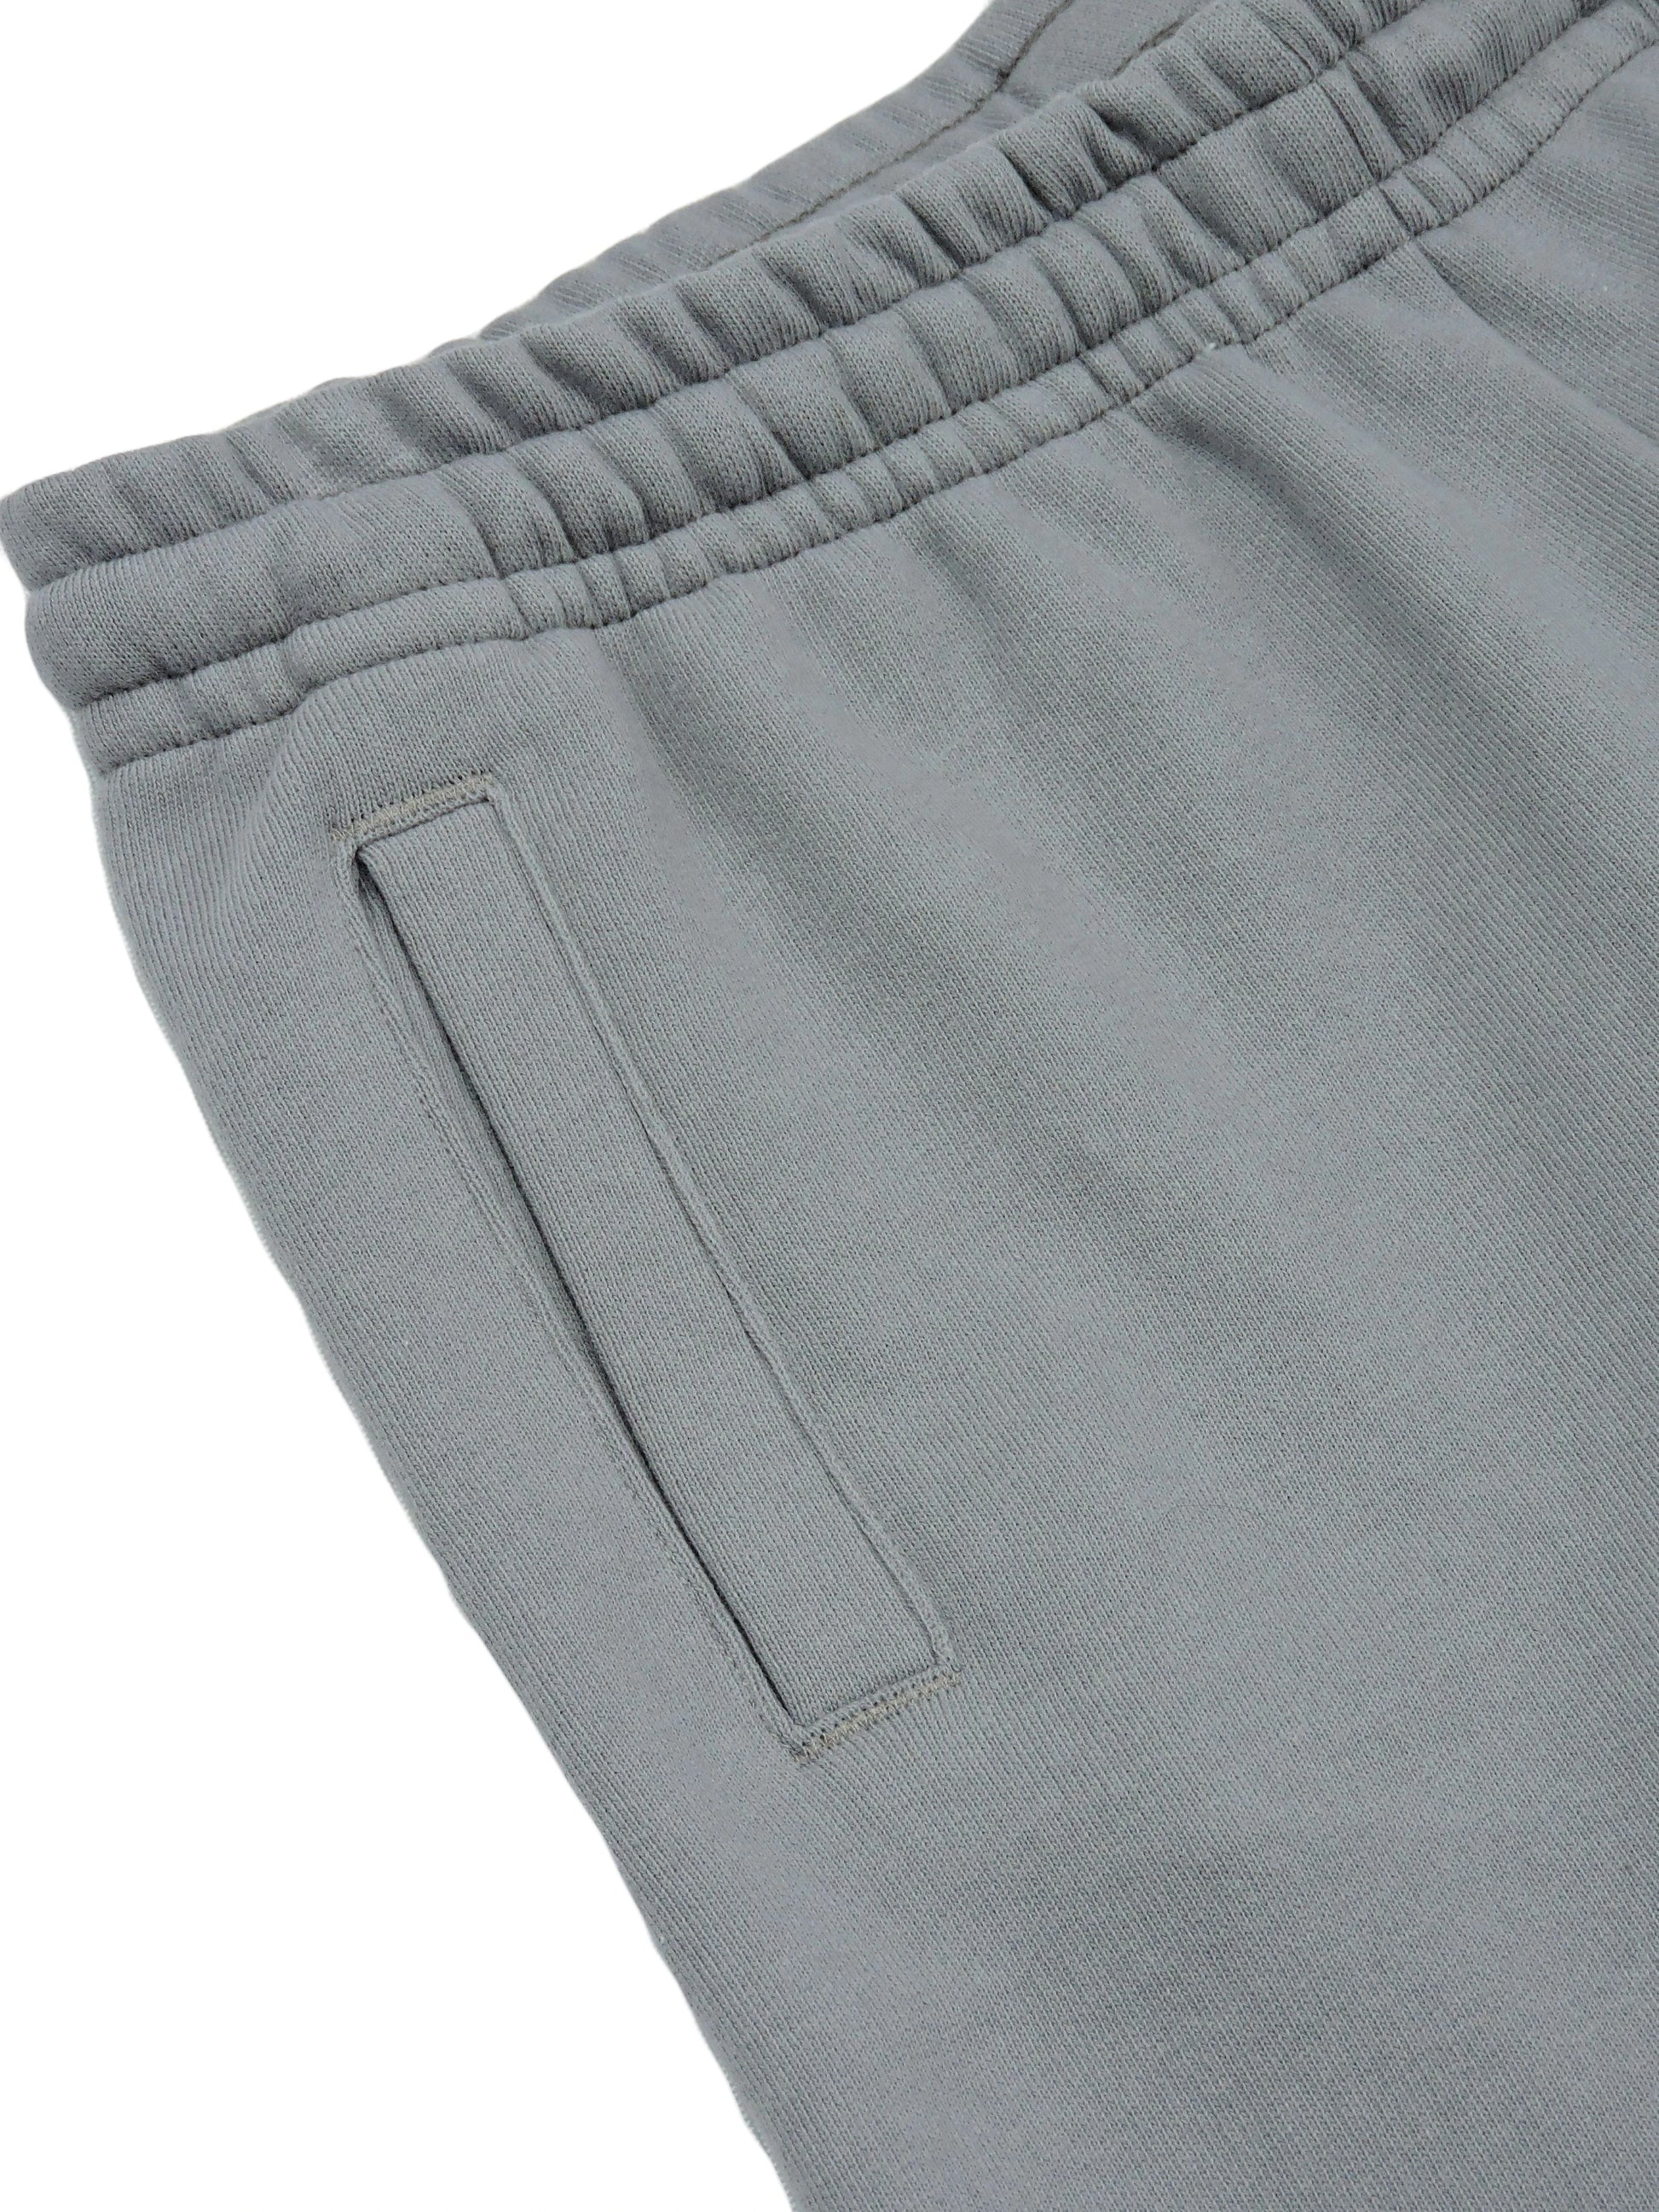 Pebble Grey French Terry Sweatpants